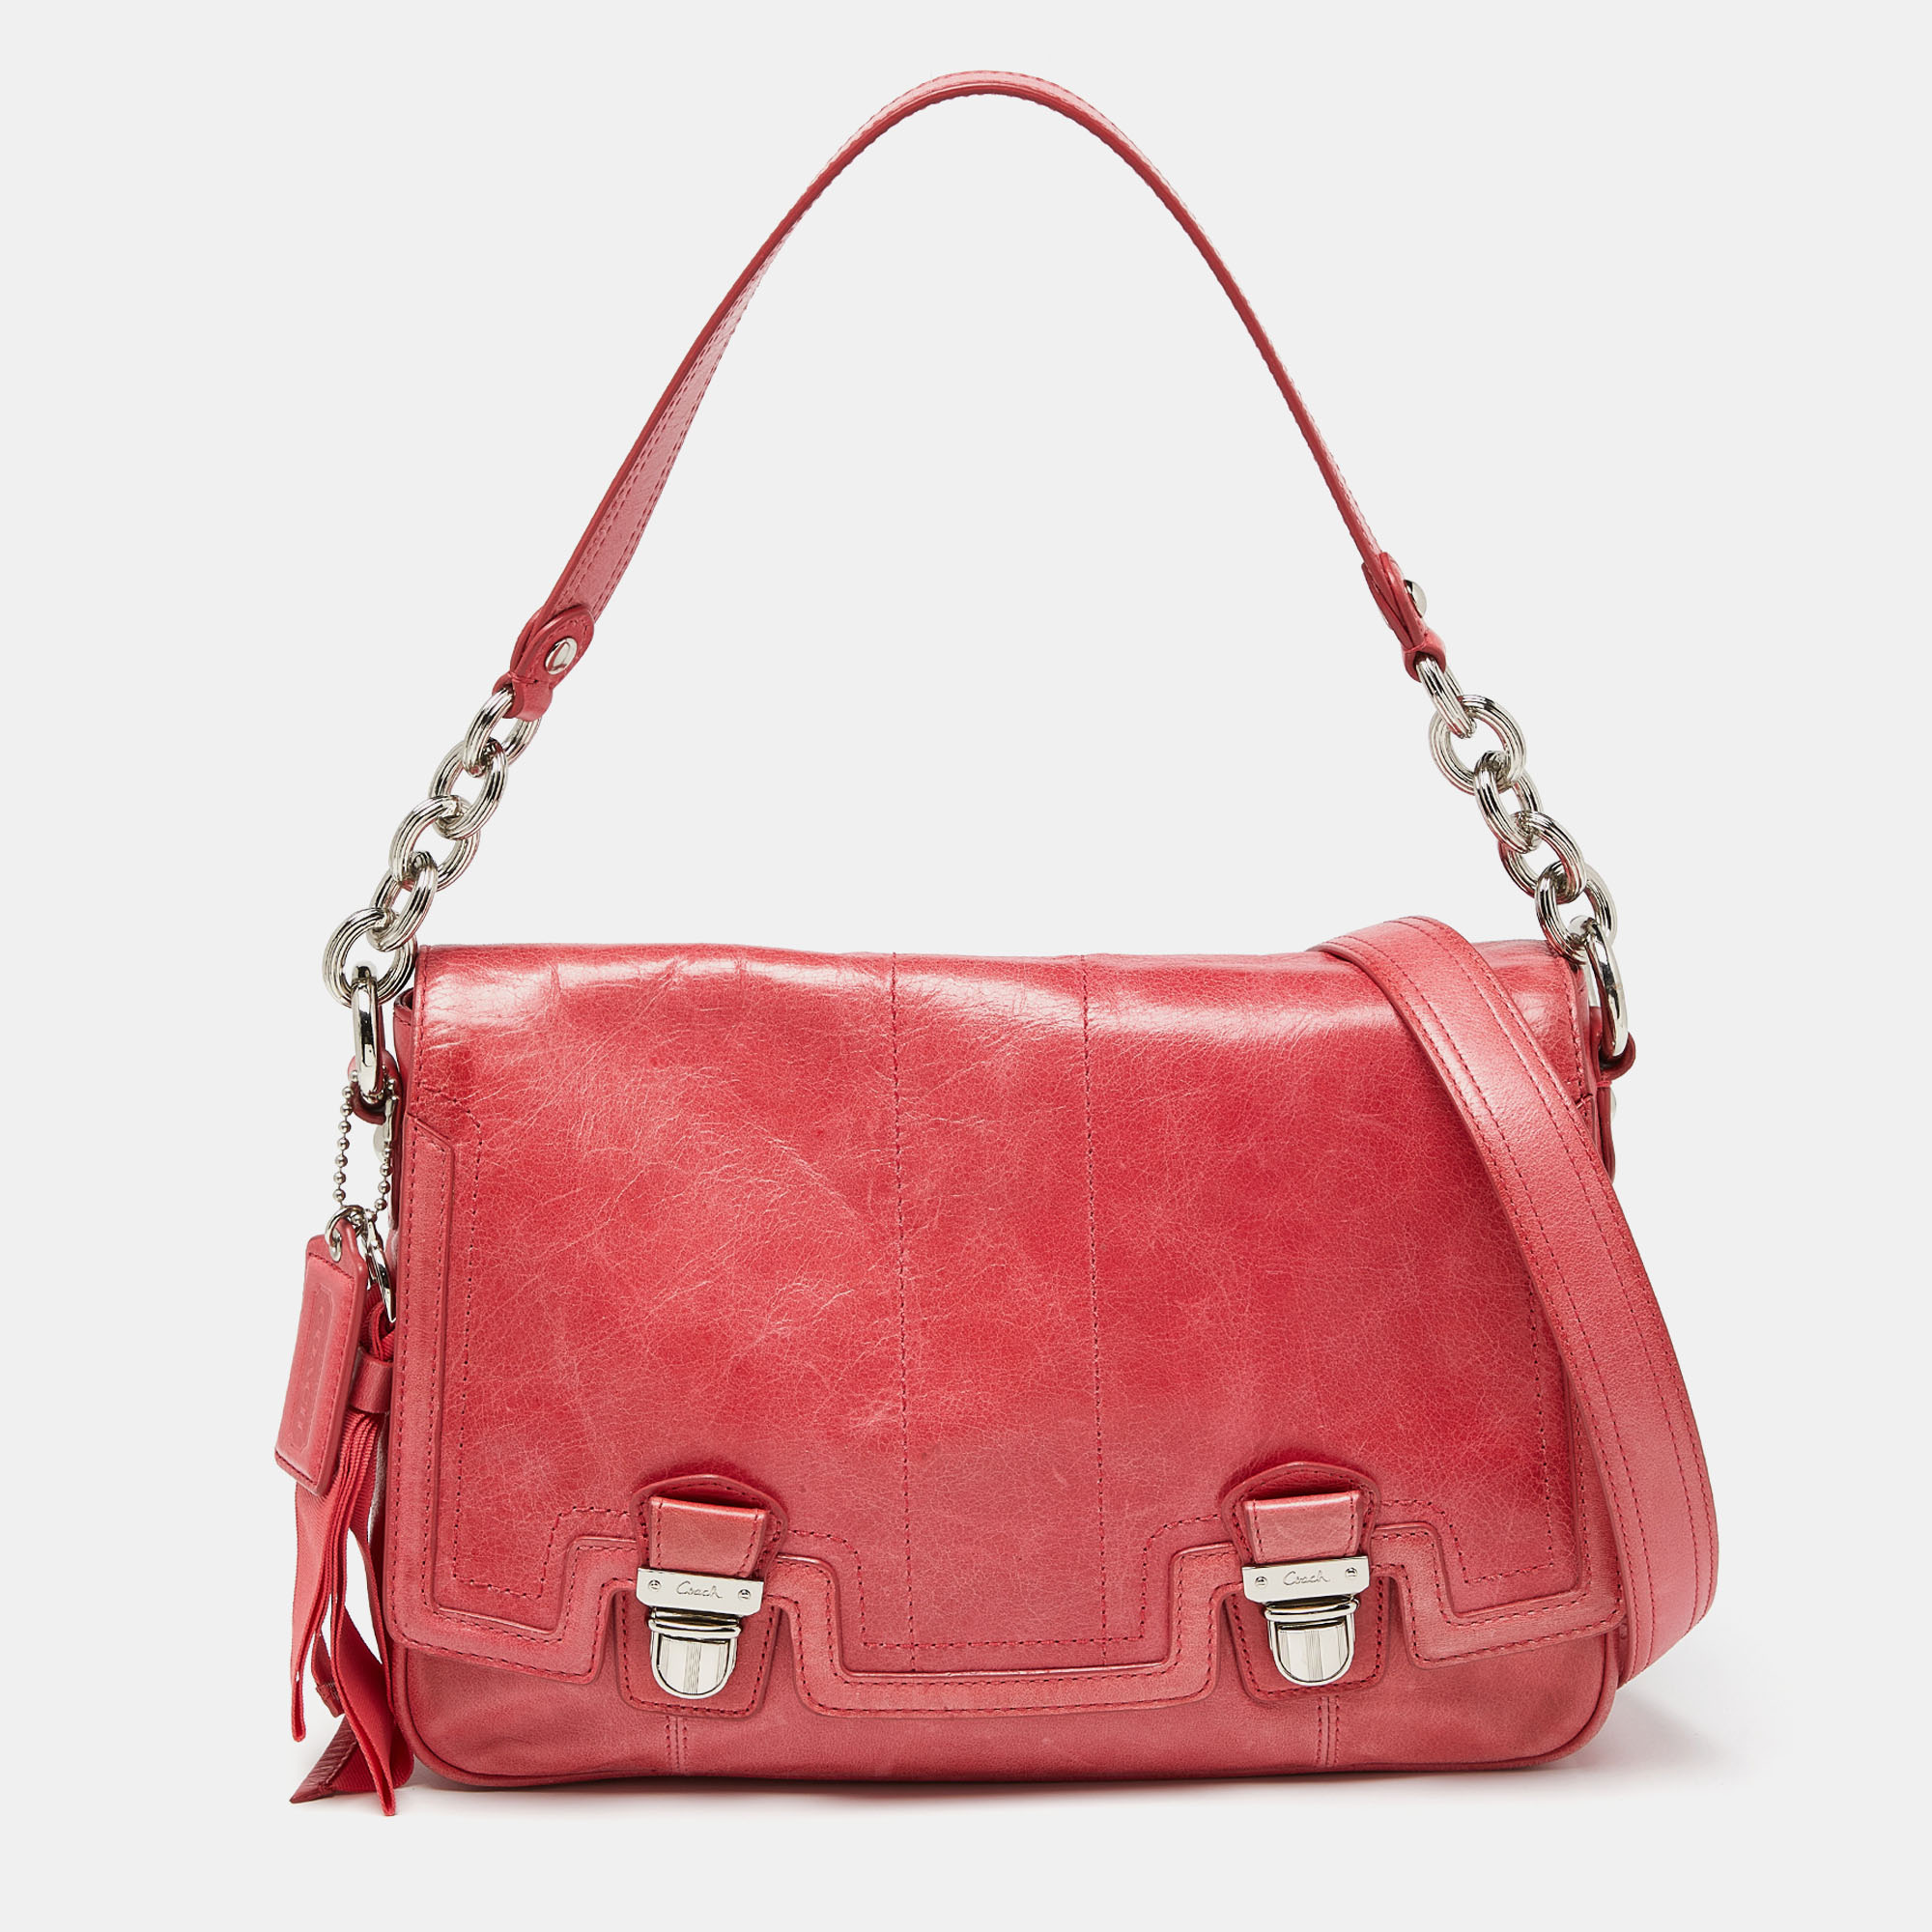 Pre-owned Coach Coral Pink Leather Poppy Flap Shoulder Bag